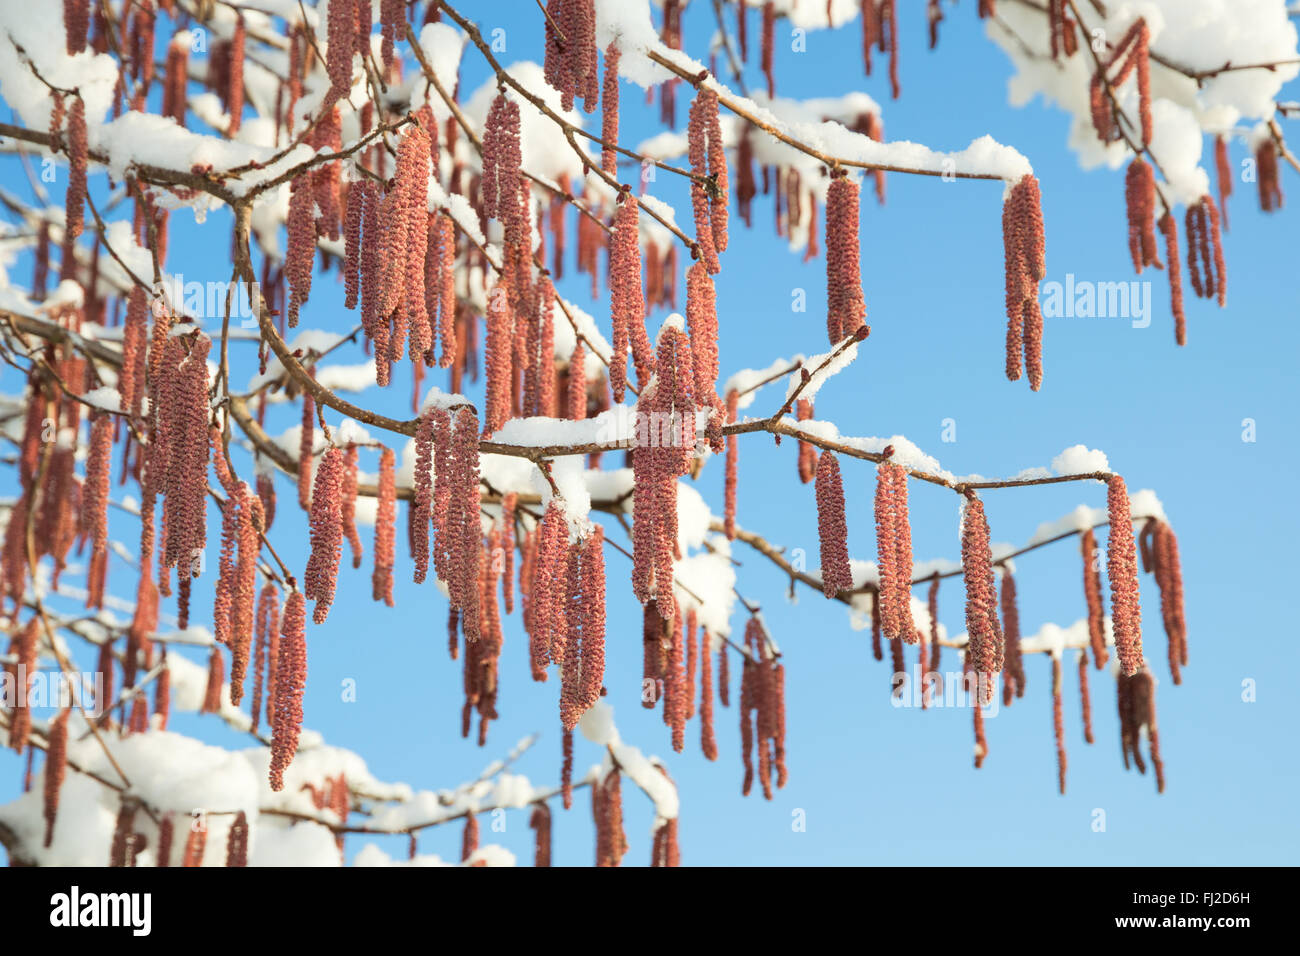 Spring snow melting on branches of alder or birch tree with catkins buds against blue clear sky Stock Photo